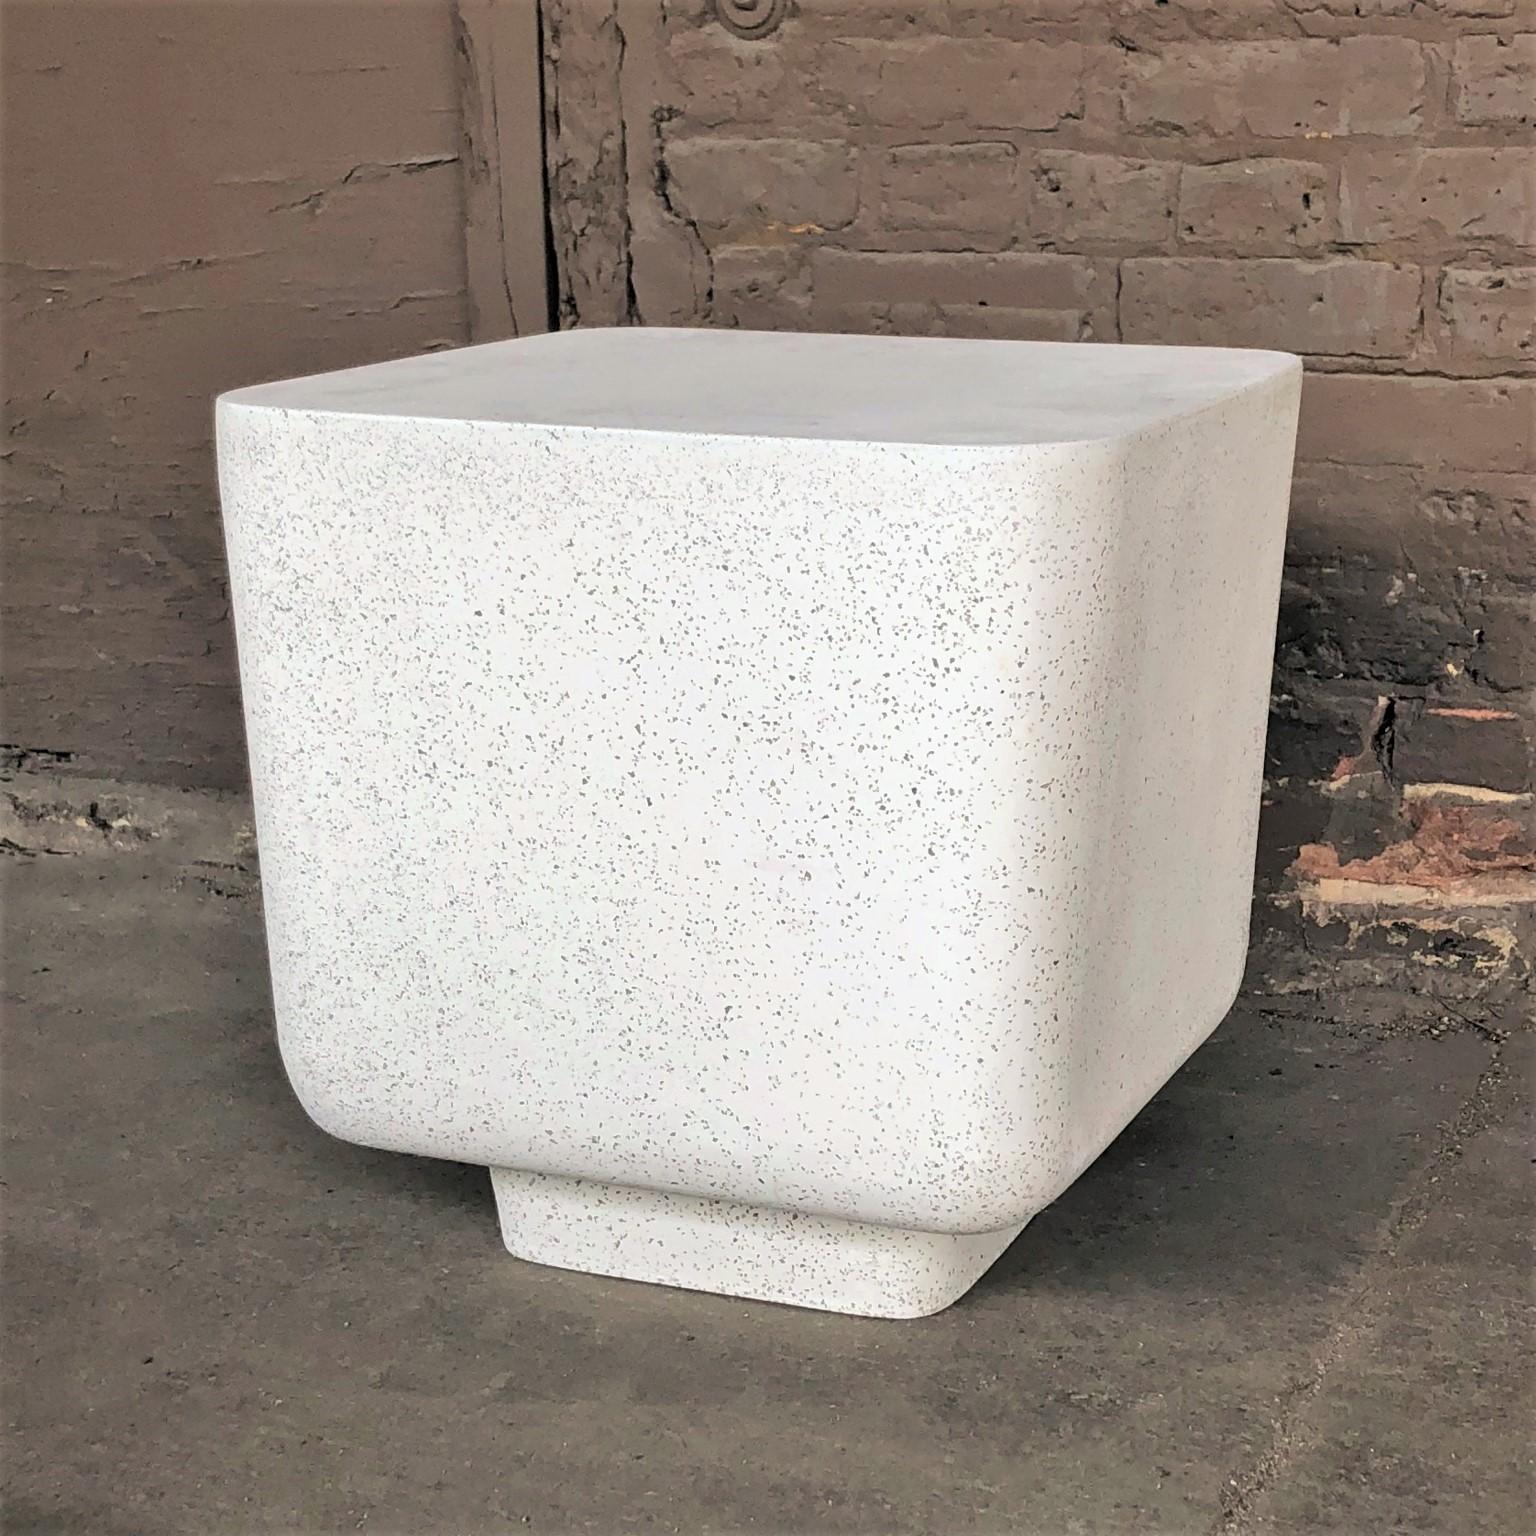 Rounded edges form a continuous plane, juxtaposing rigid structural expectation with an infinite expanse. A reliable, welcoming presence.

Dimensions: Width 18 in. (45.7 cm), depth 18 in. (45.7 cm), height 18 in. (45.7 cm). Weight 20 lbs. (9 kg)
No